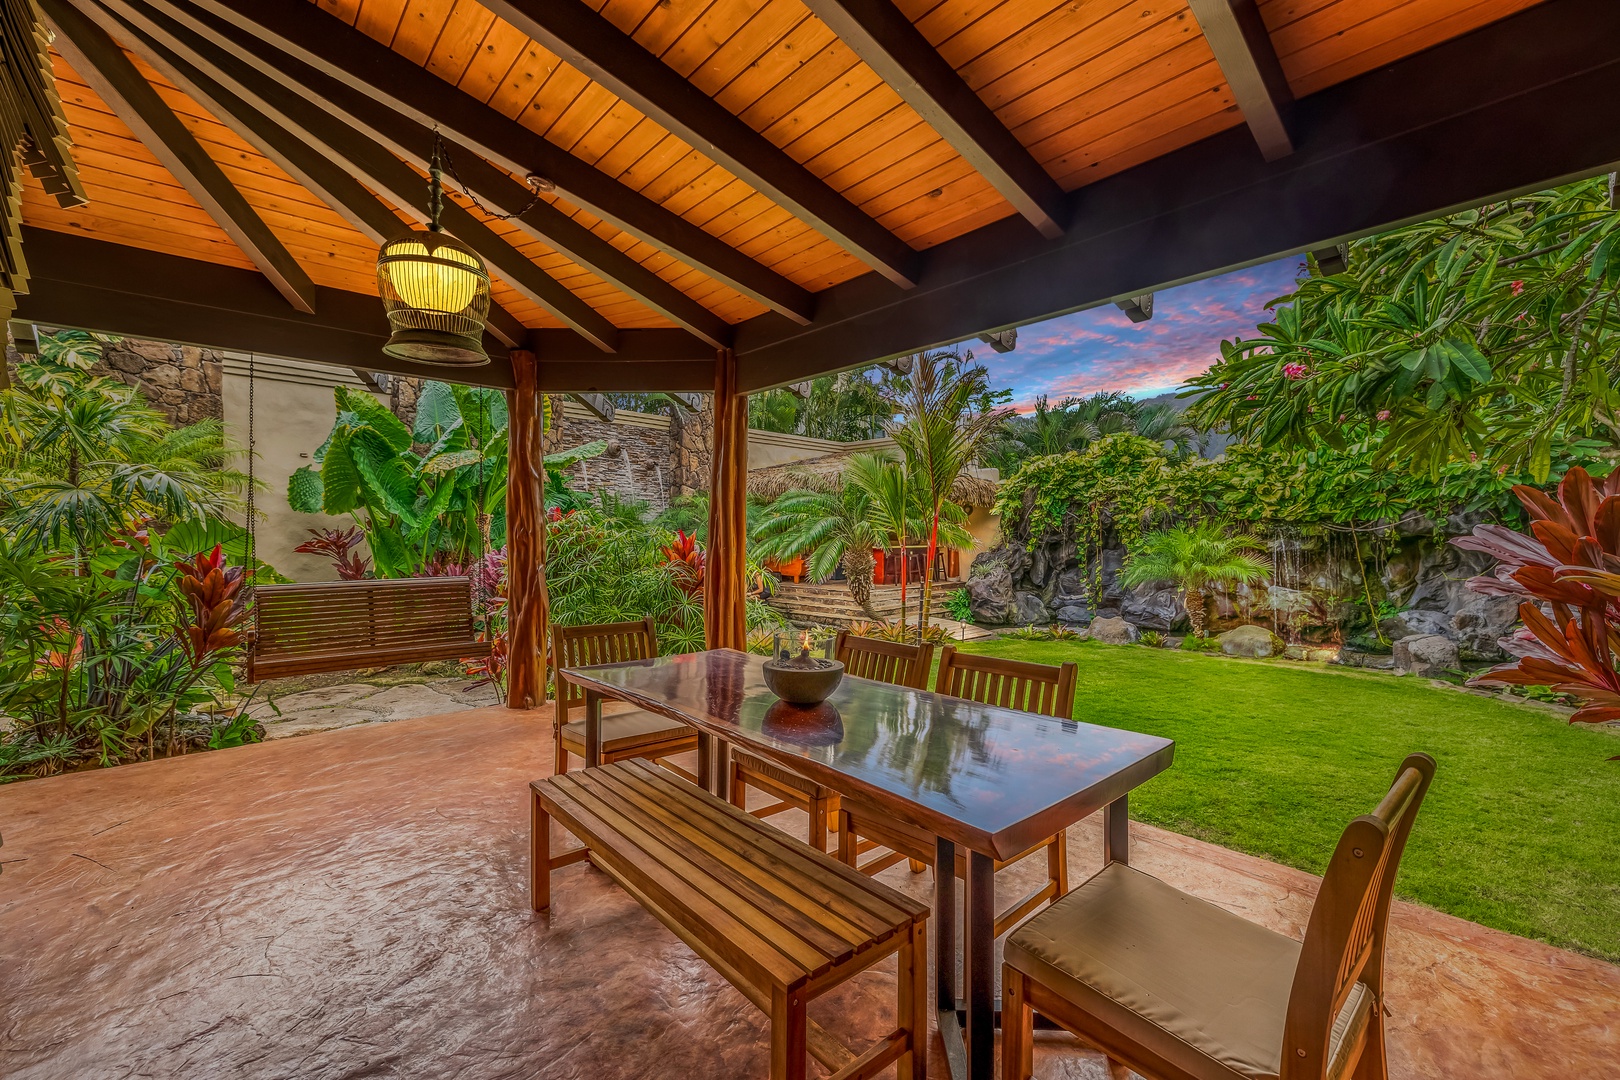 Waimanalo Vacation Rentals, Hawaii Hobbit House - Covered lanai has outdoor table and seating for 6 with two chairs to be added for 8